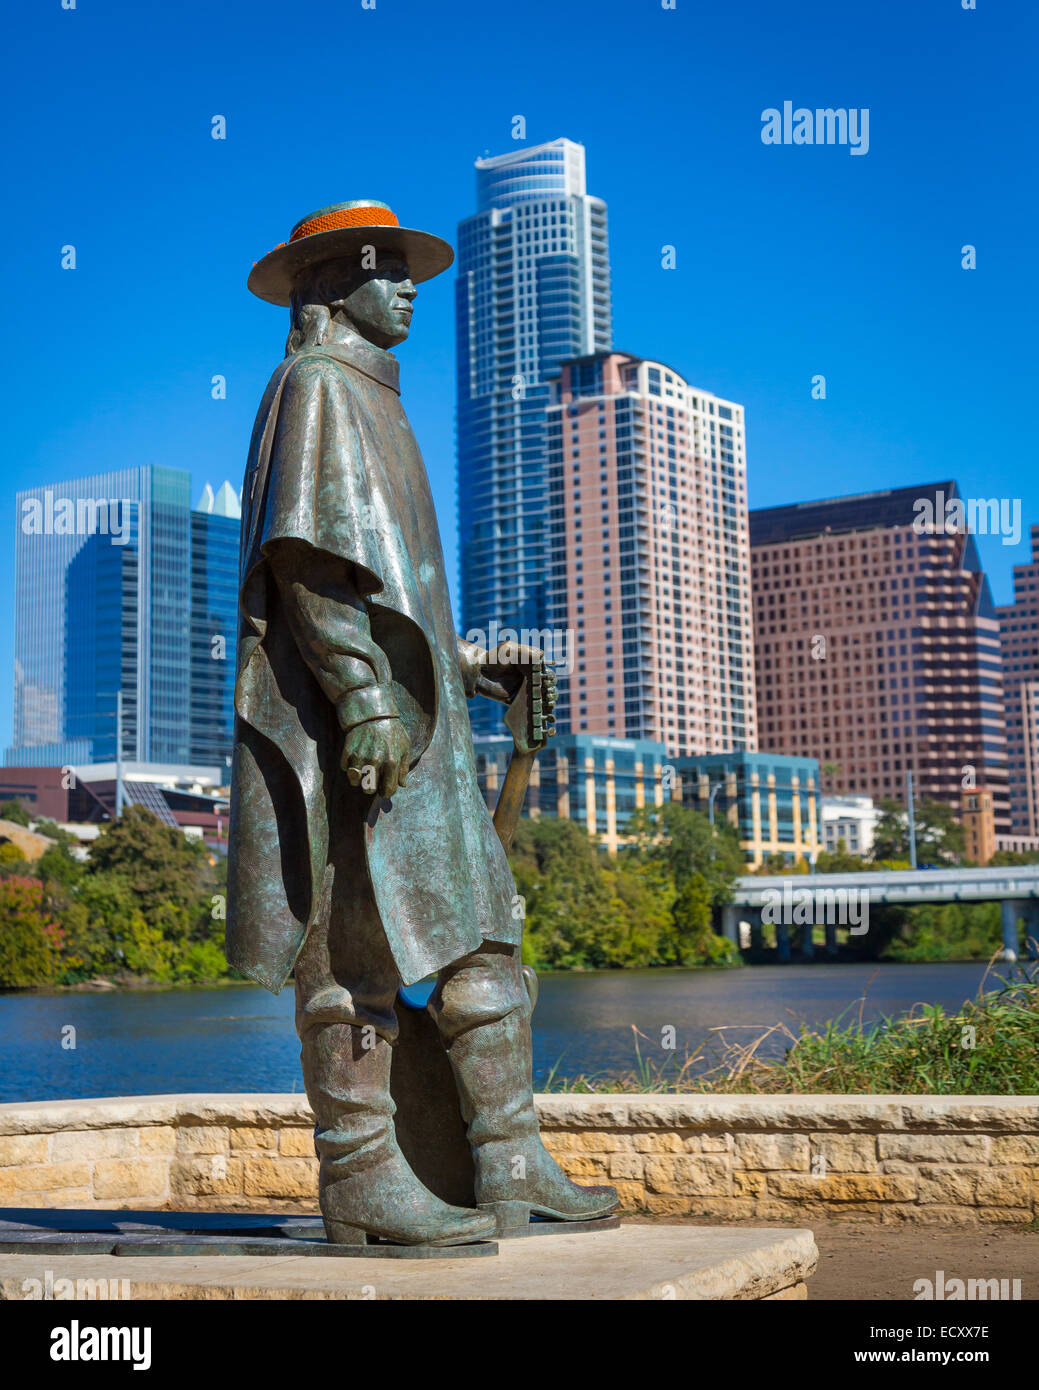 Stevie Ray Vaughan Memorial is a bronze sculpture of Stevie Ray Vaughan by Ralph Helmick, located in Austin, Texas Stock Photo